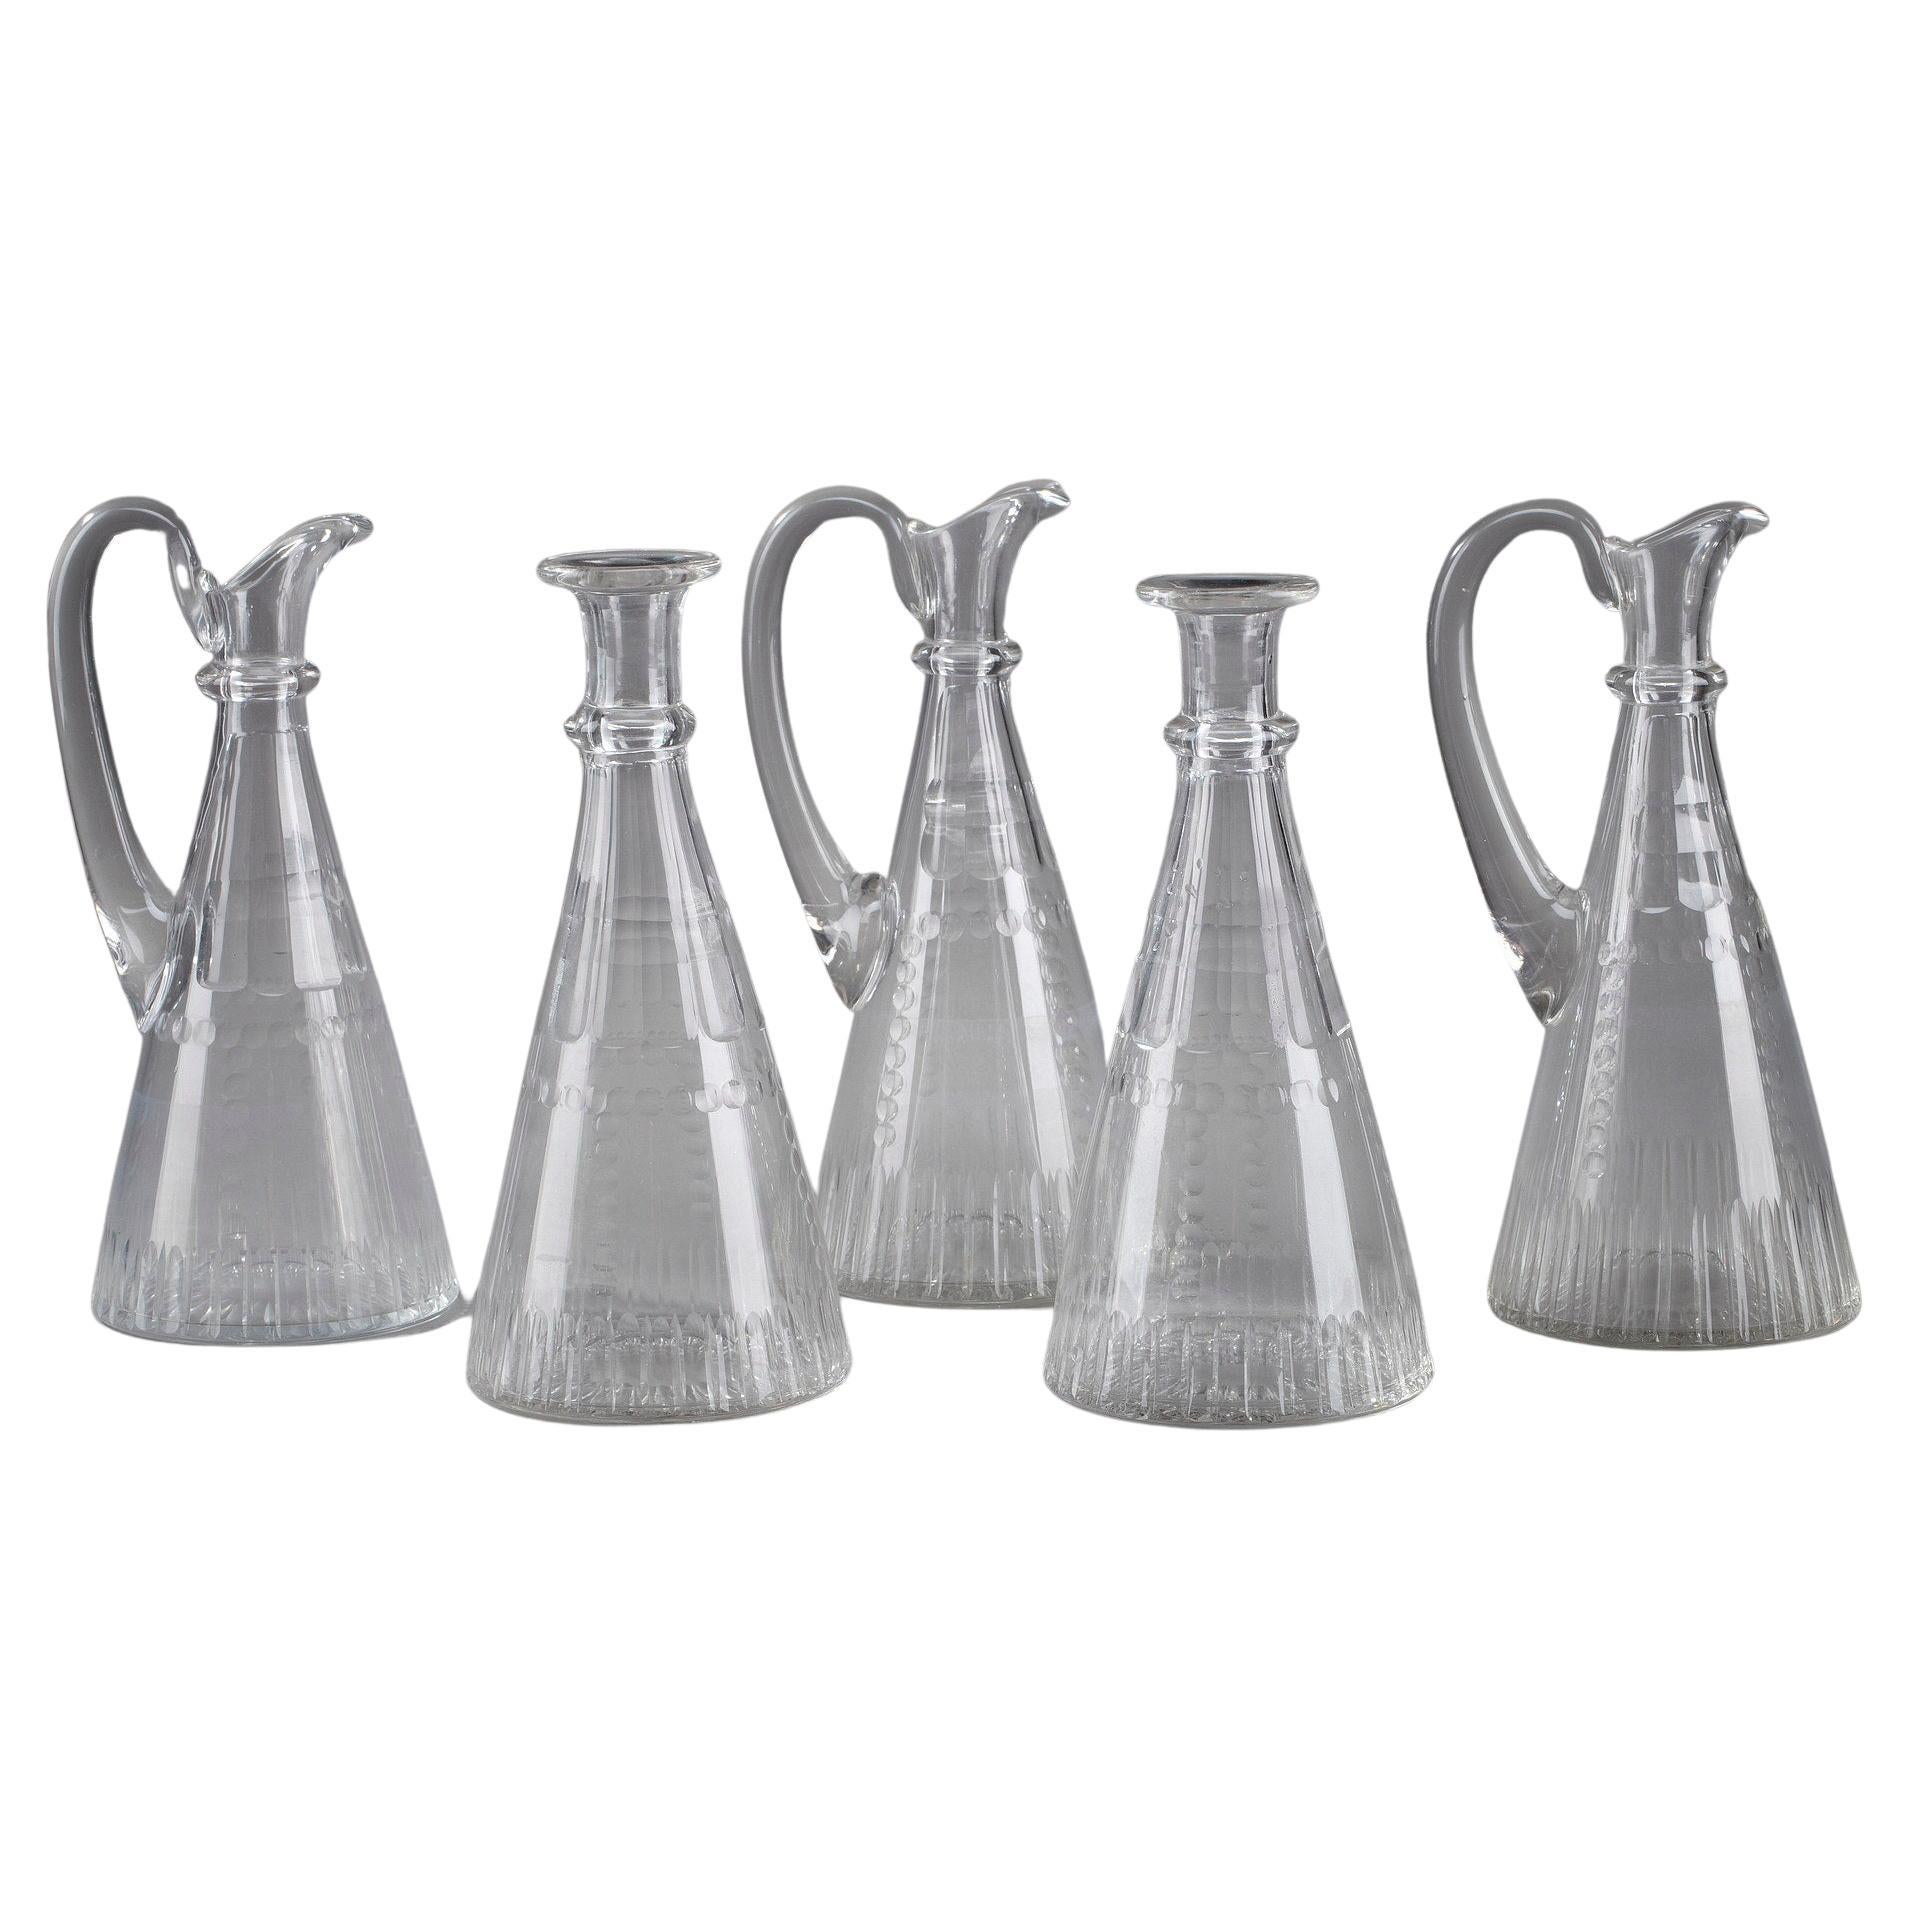 Set of Pitchers and Decanters in Molded Glass